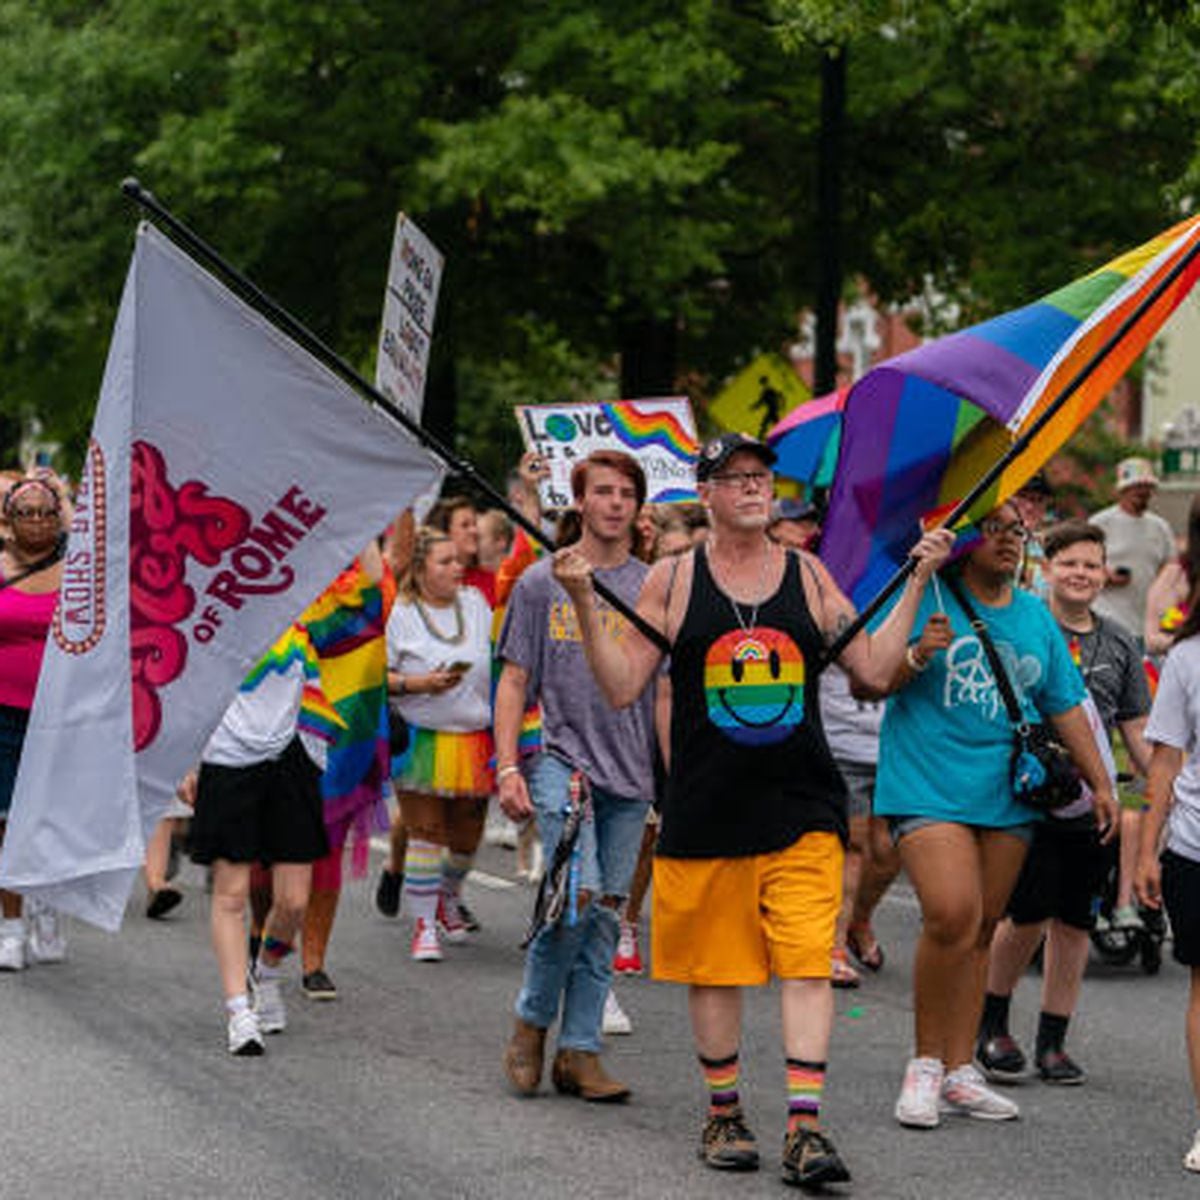 MLB takes part in Pride March for first time